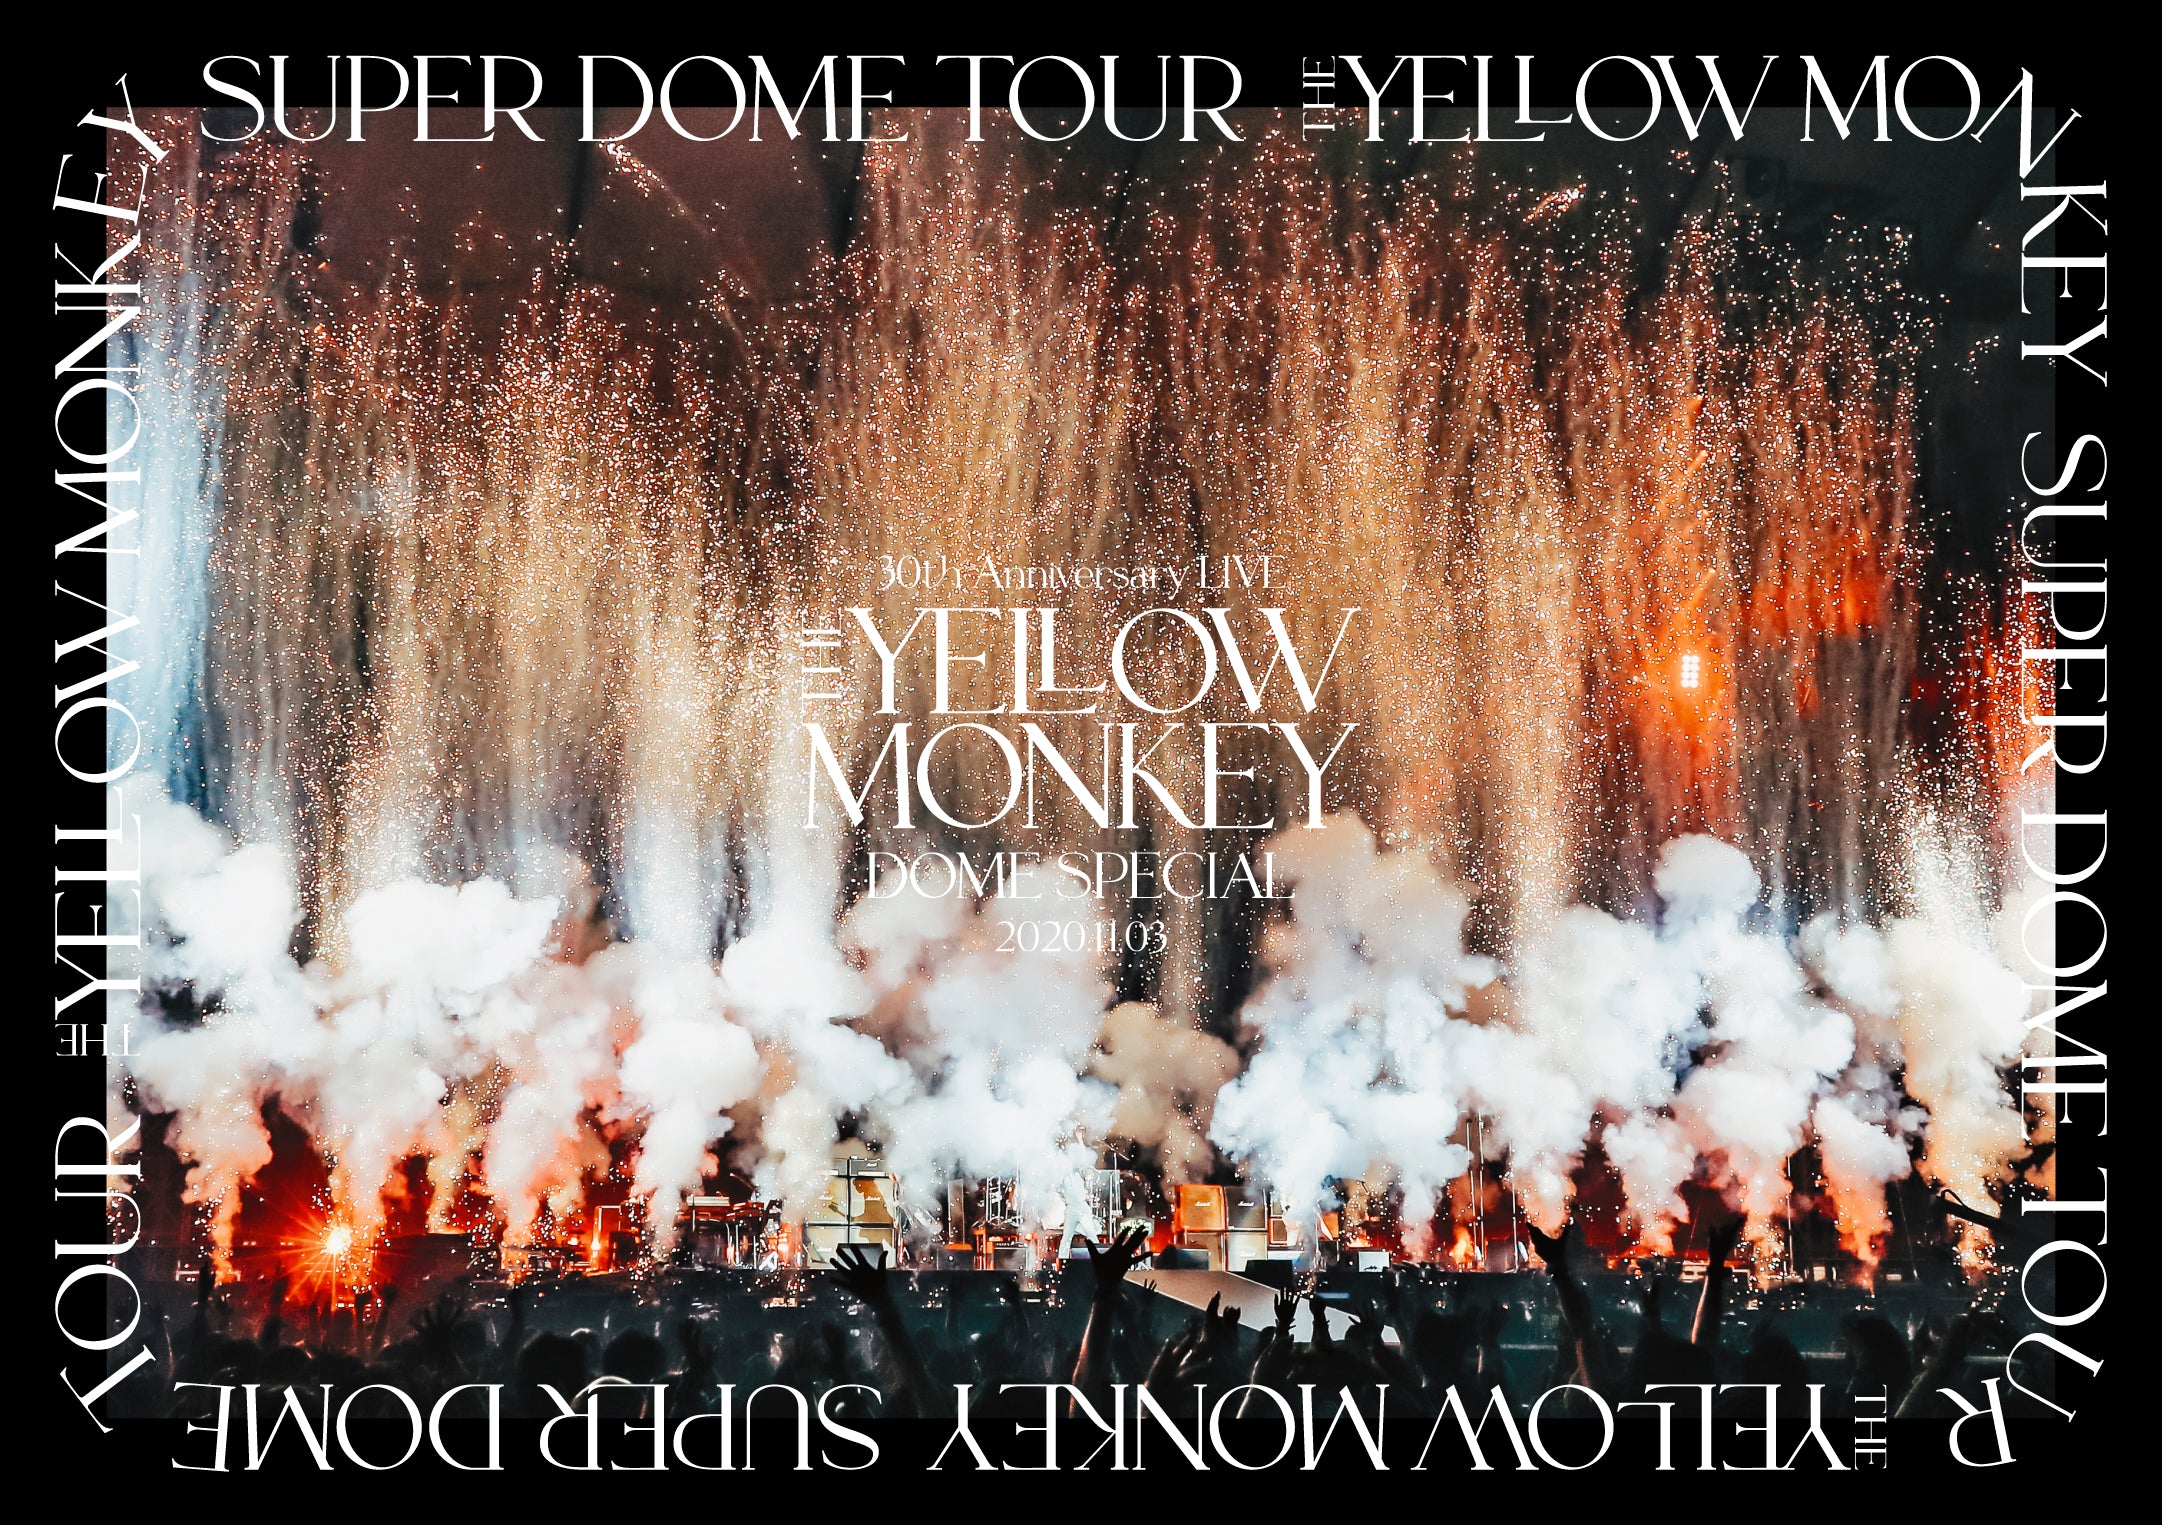 『THE YELLOW MONKEY 30th Anniversary LIVE -DOME SPECIAL- 2020.11.3』Blu-ray